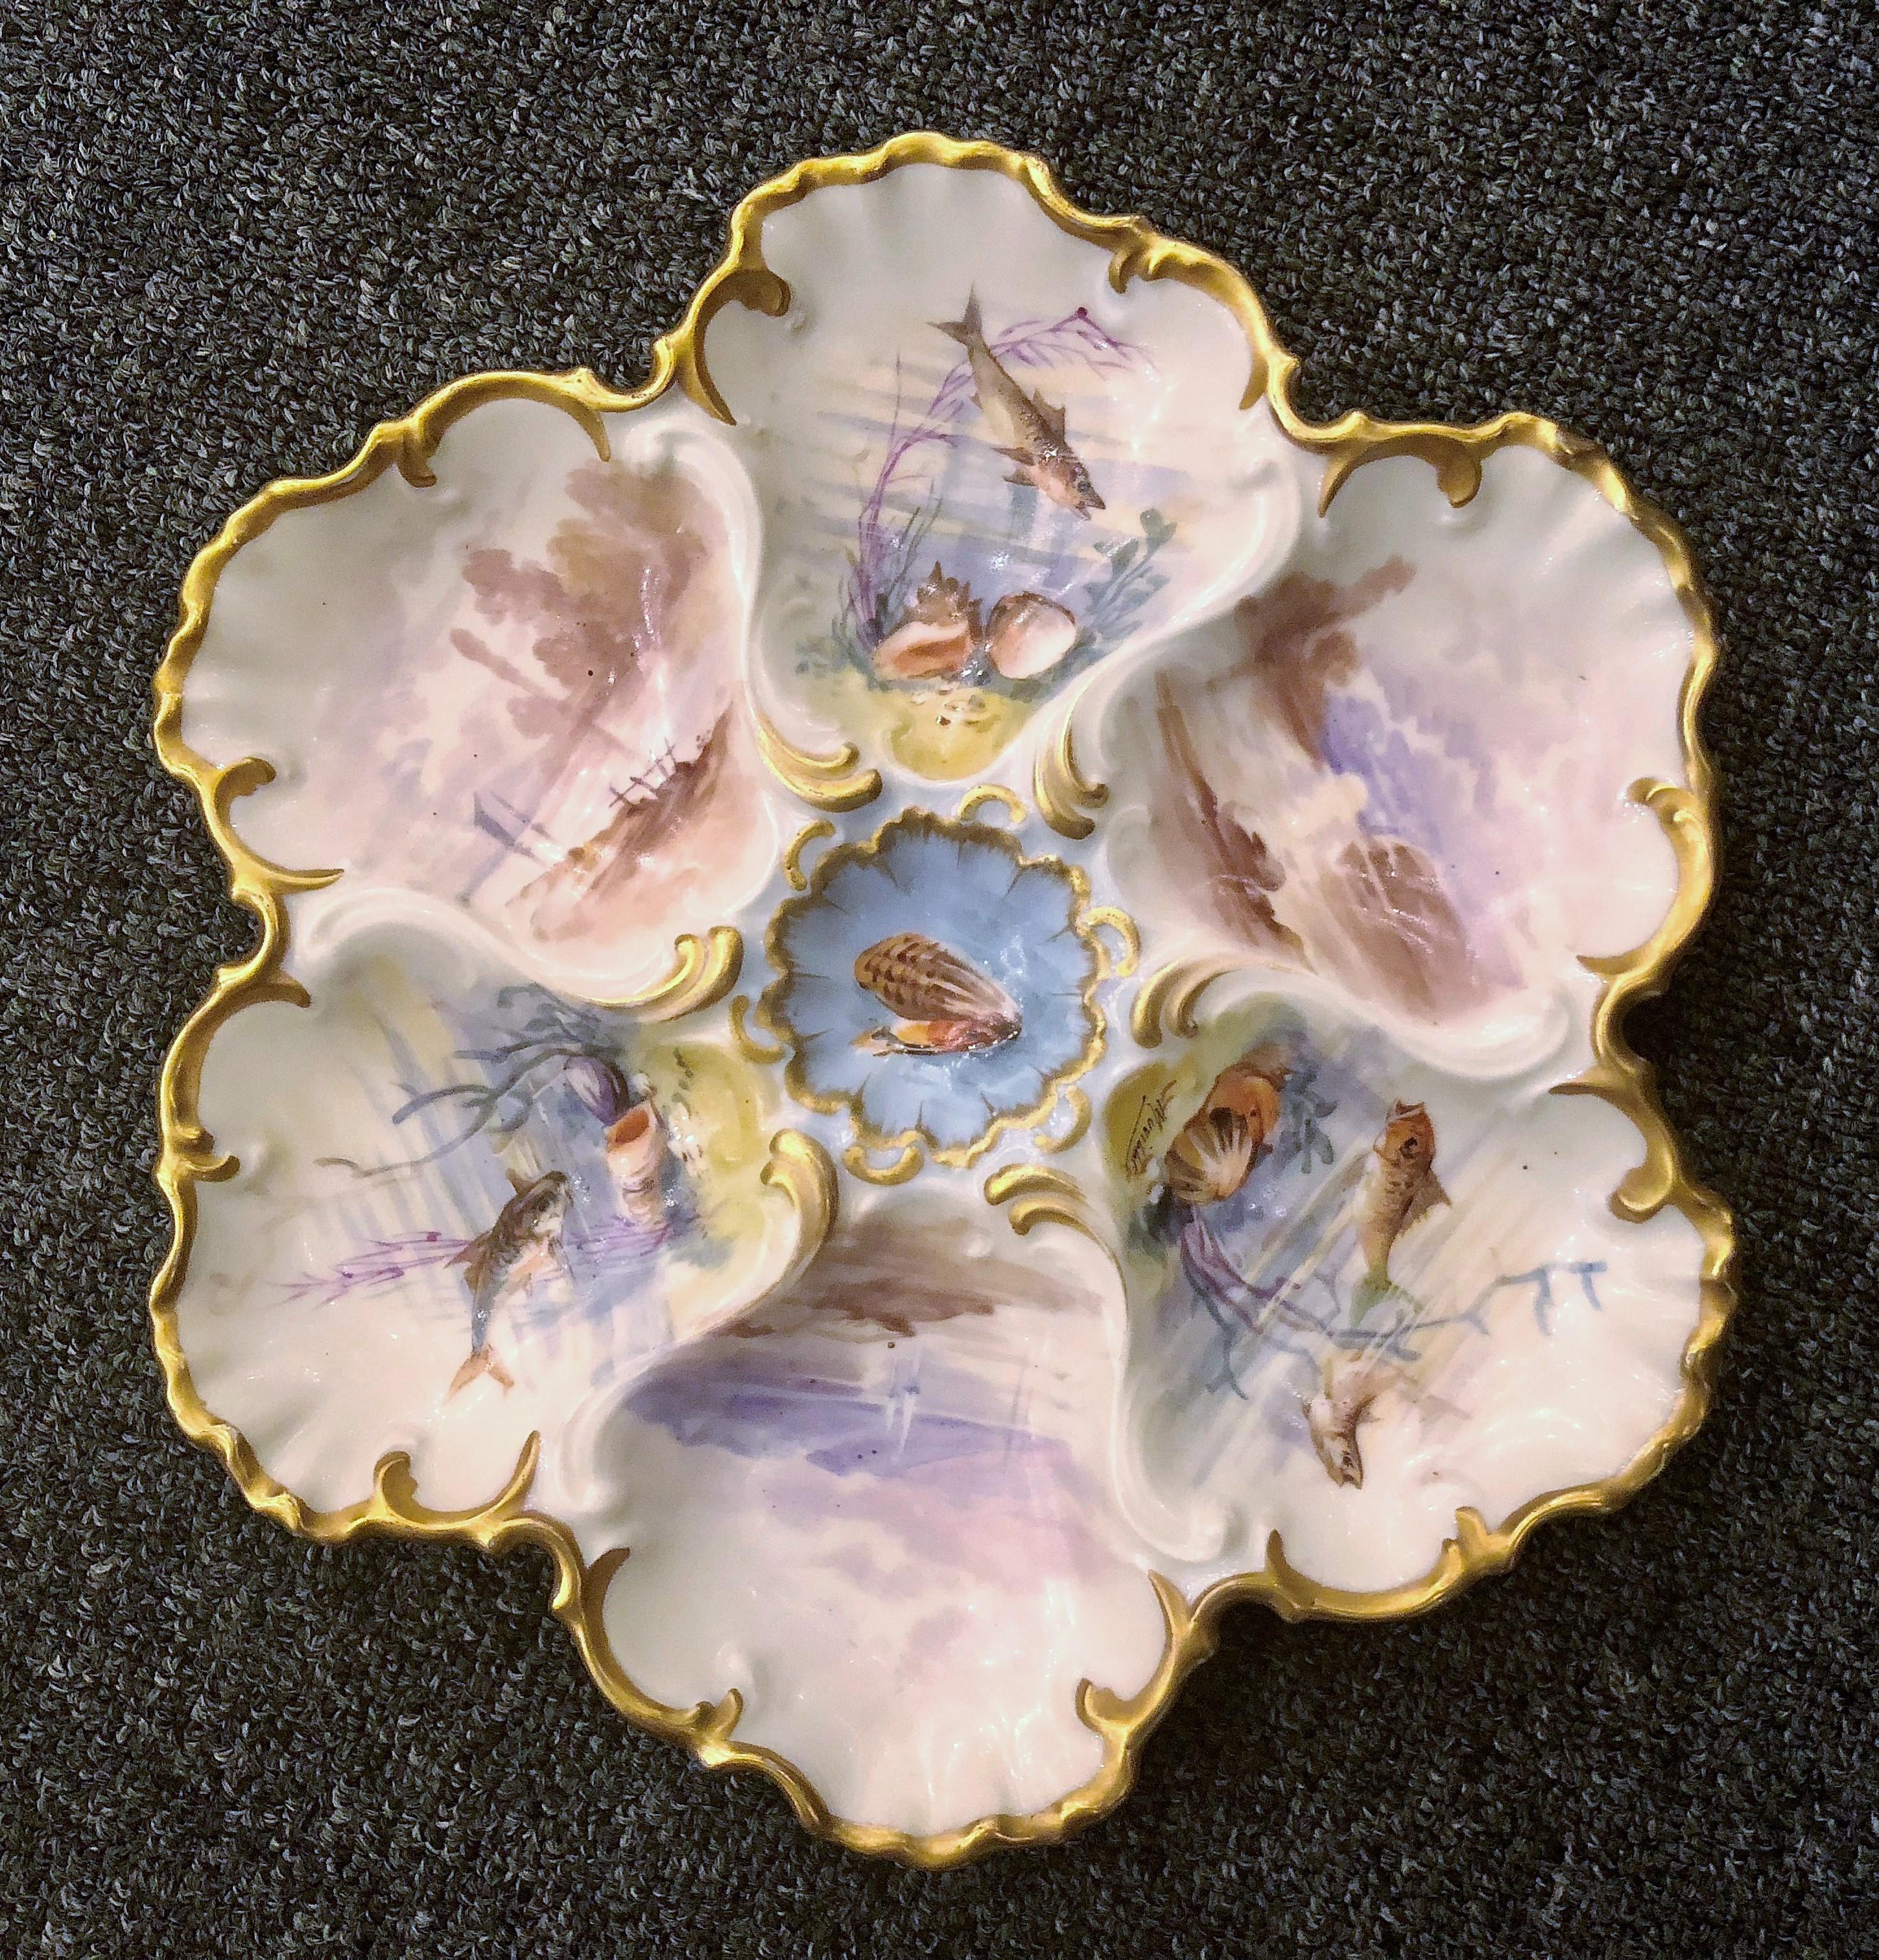 Antique French Limoges hand-painted porcelain oyster plate, circa 1890-1900.